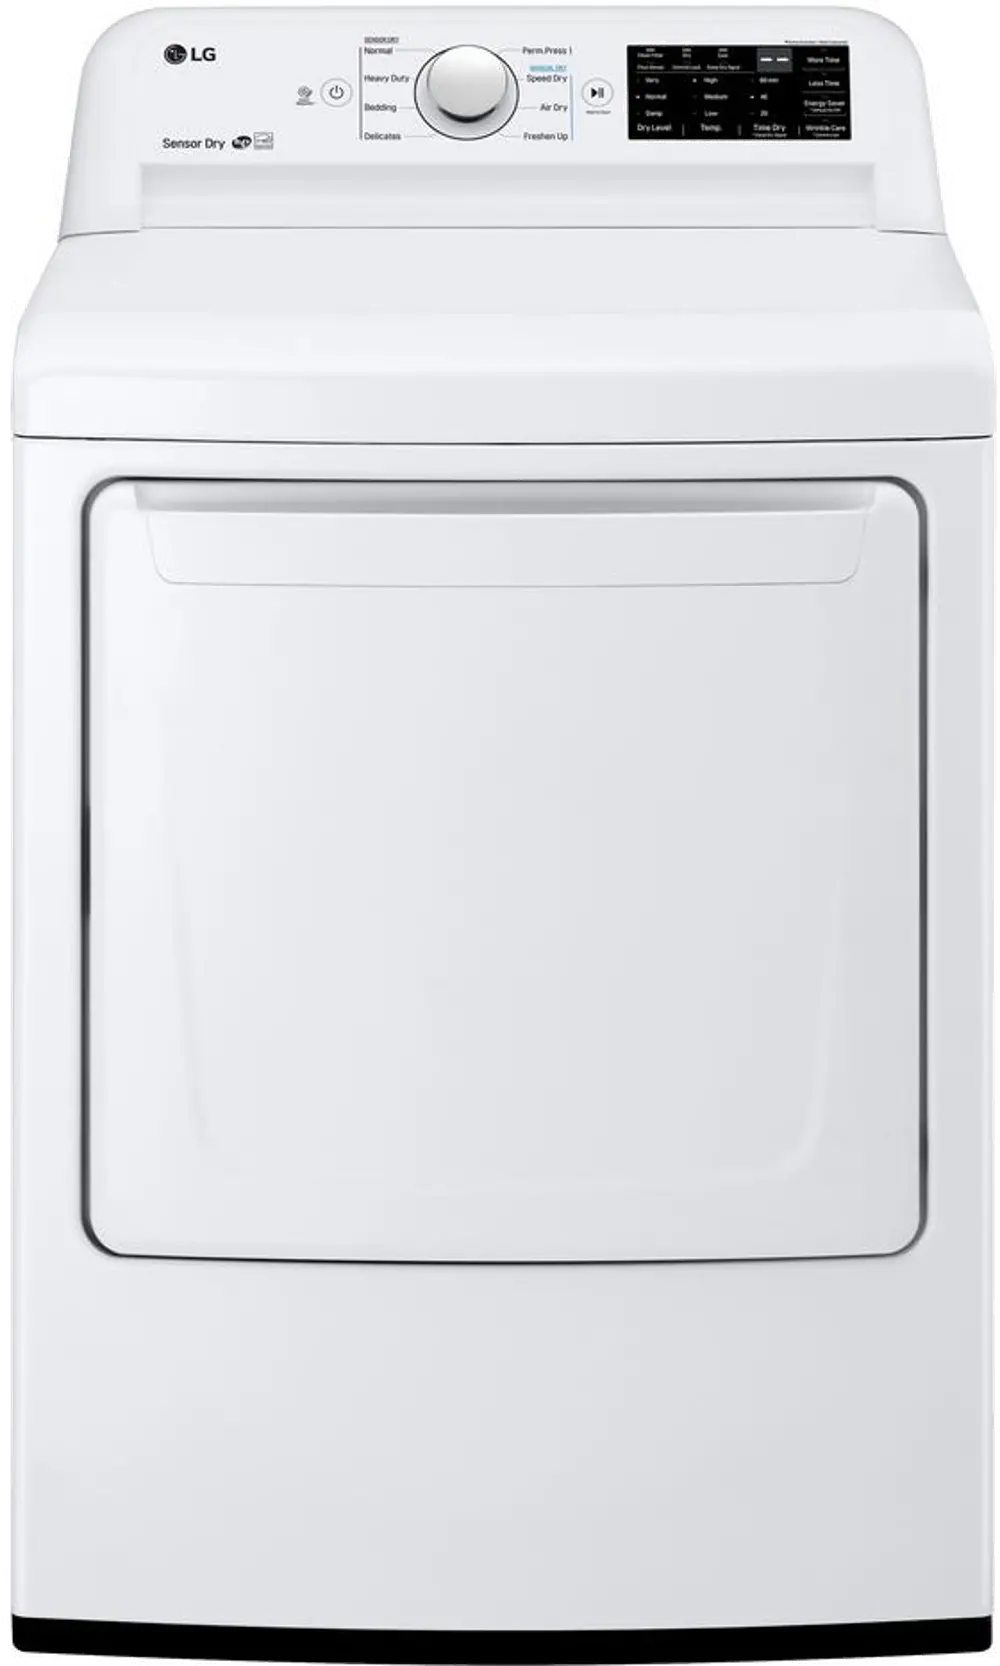 DLE7100W LG Electric Dryer with Dial-a-Cycle - White-1